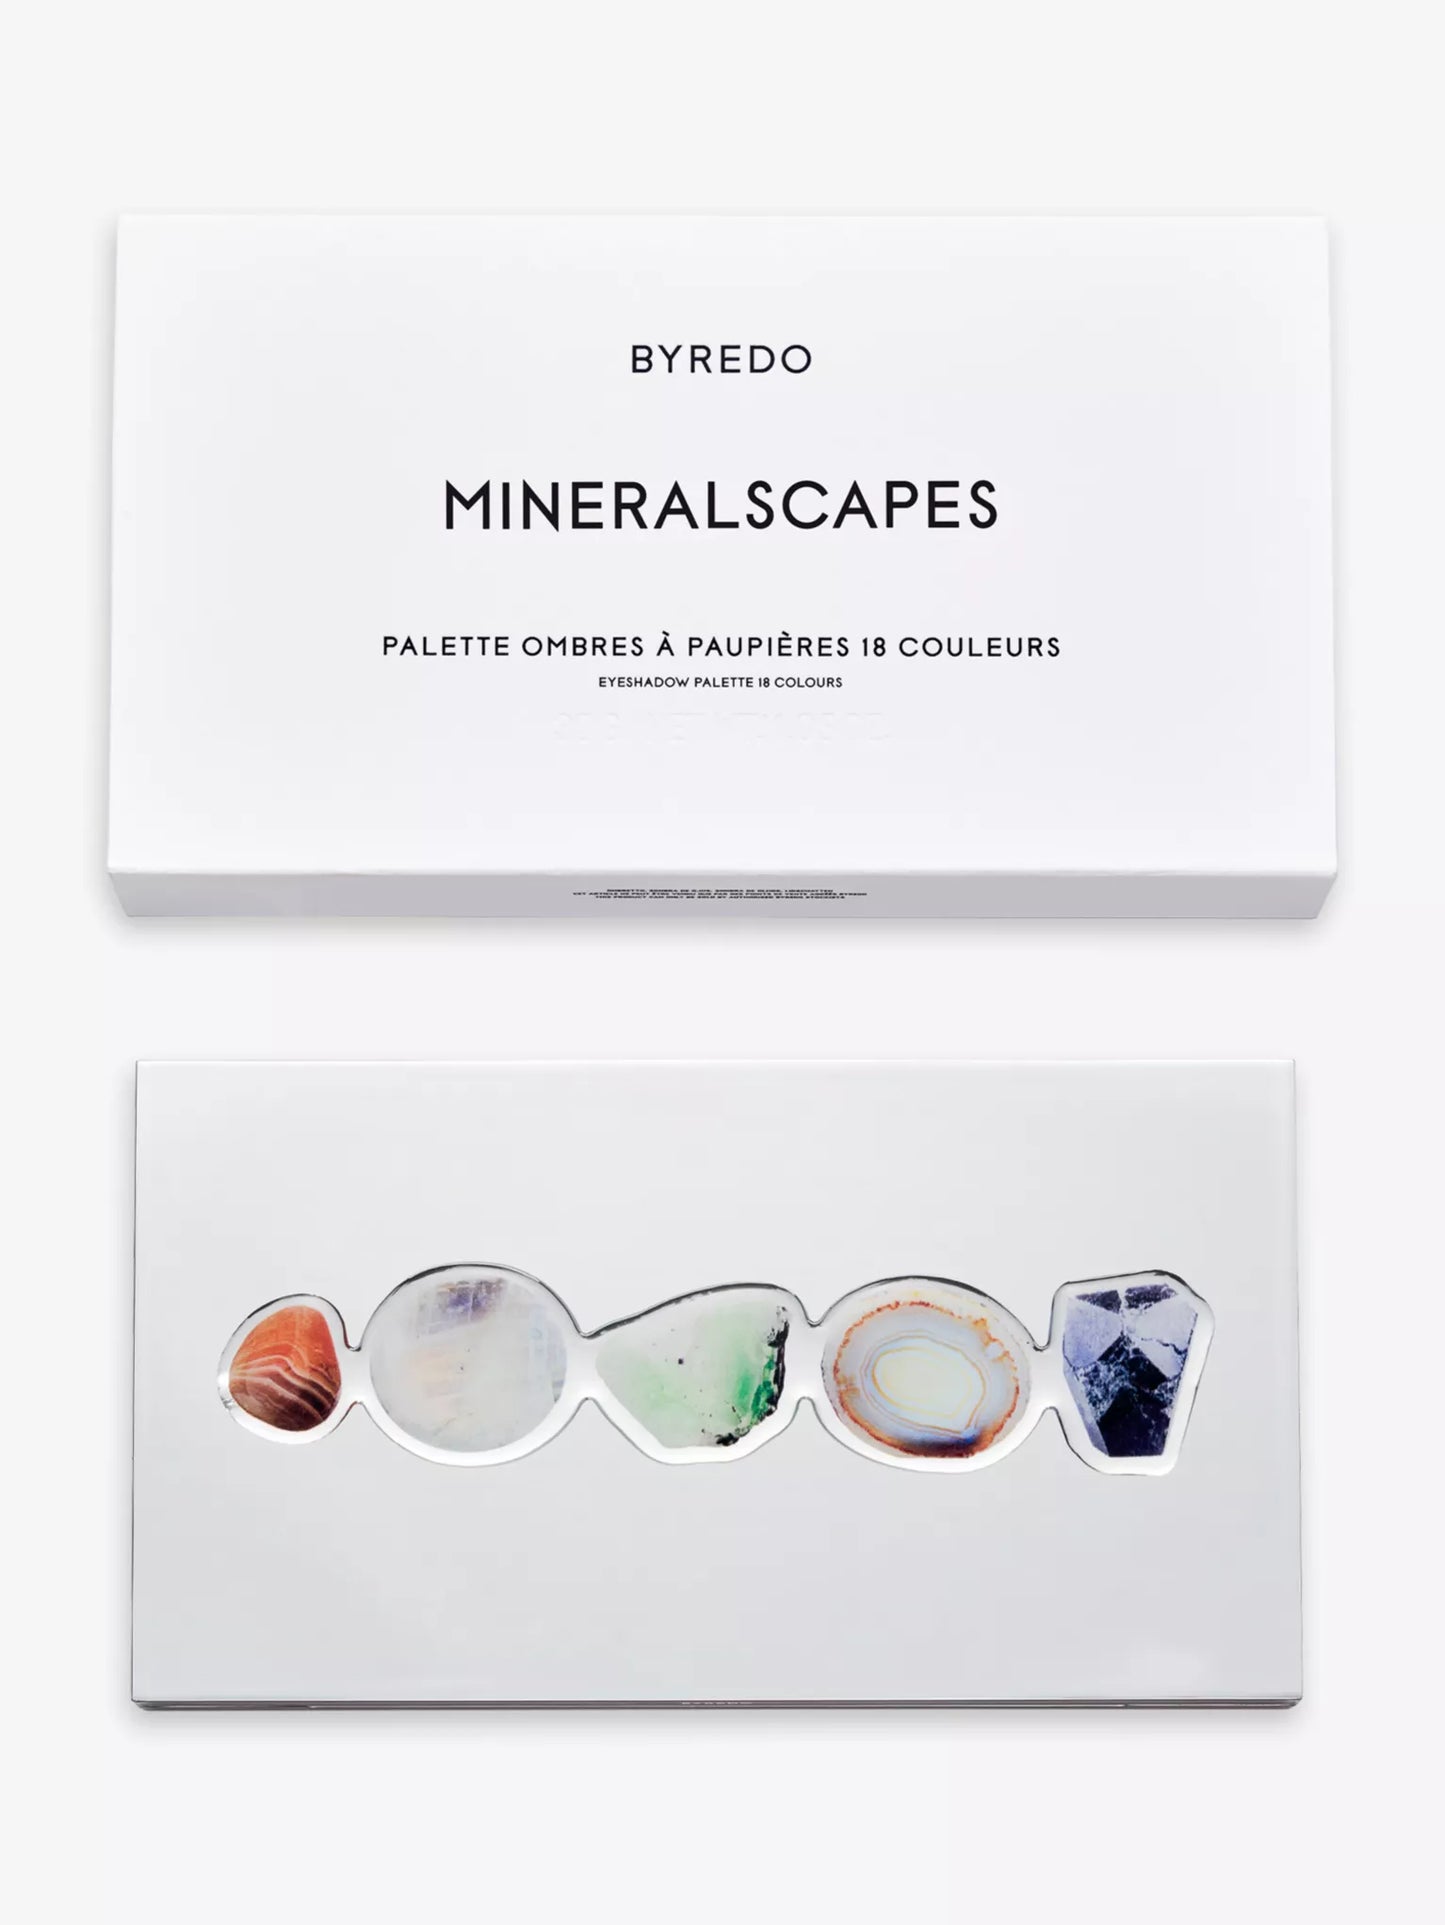 BYREDO Mineralscapes 18 colour eyeshadow palette 268g